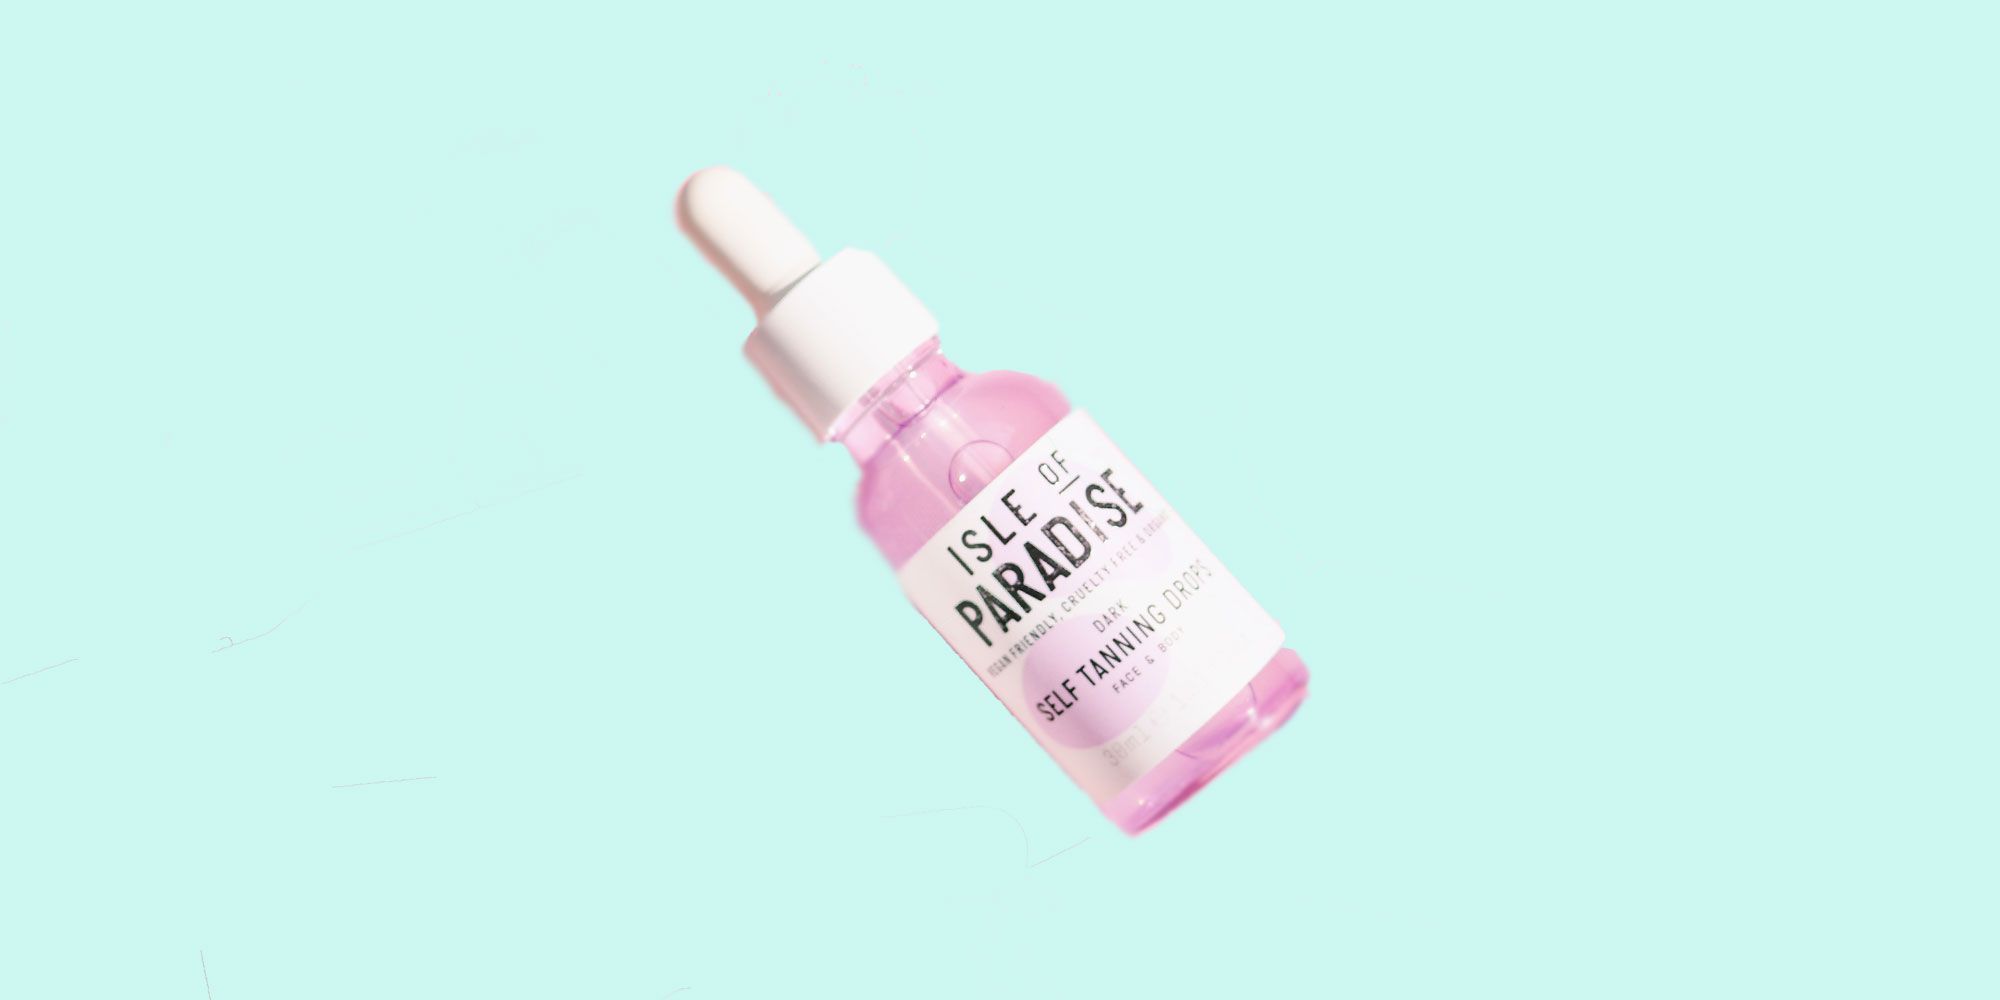 Isle Of Paradise Tanning Drops Review: Self Tanning Drops